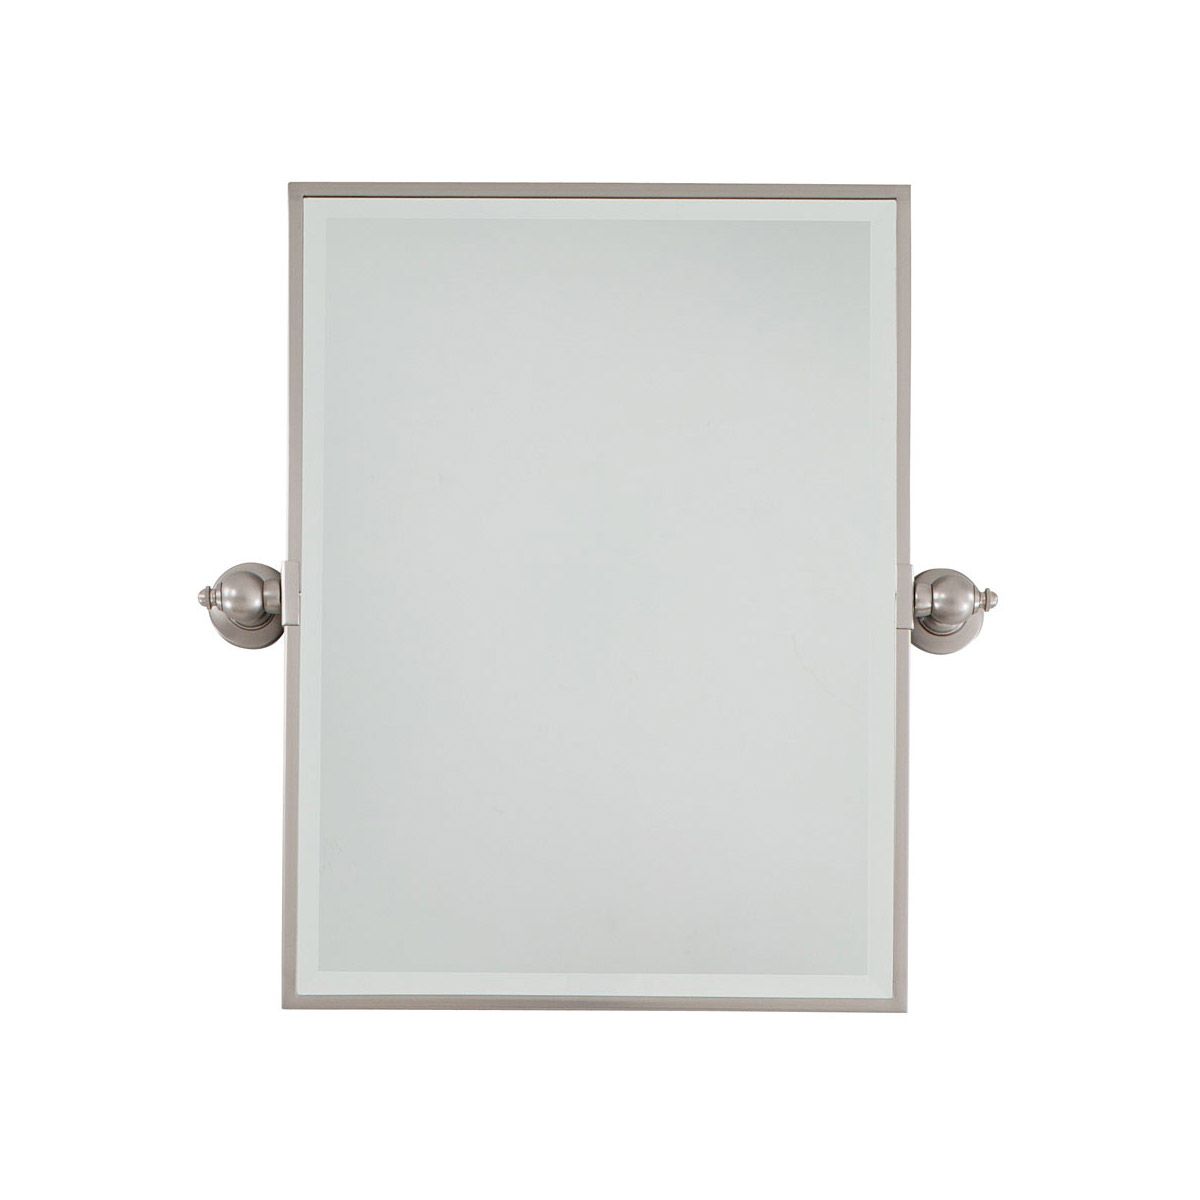 Minka Lavery 1440 84 Pivot Mirrors Wall Mirror Brushed Nickel | Ebay Intended For Polished Nickel Rectangular Wall Mirrors (Photo 15 of 15)